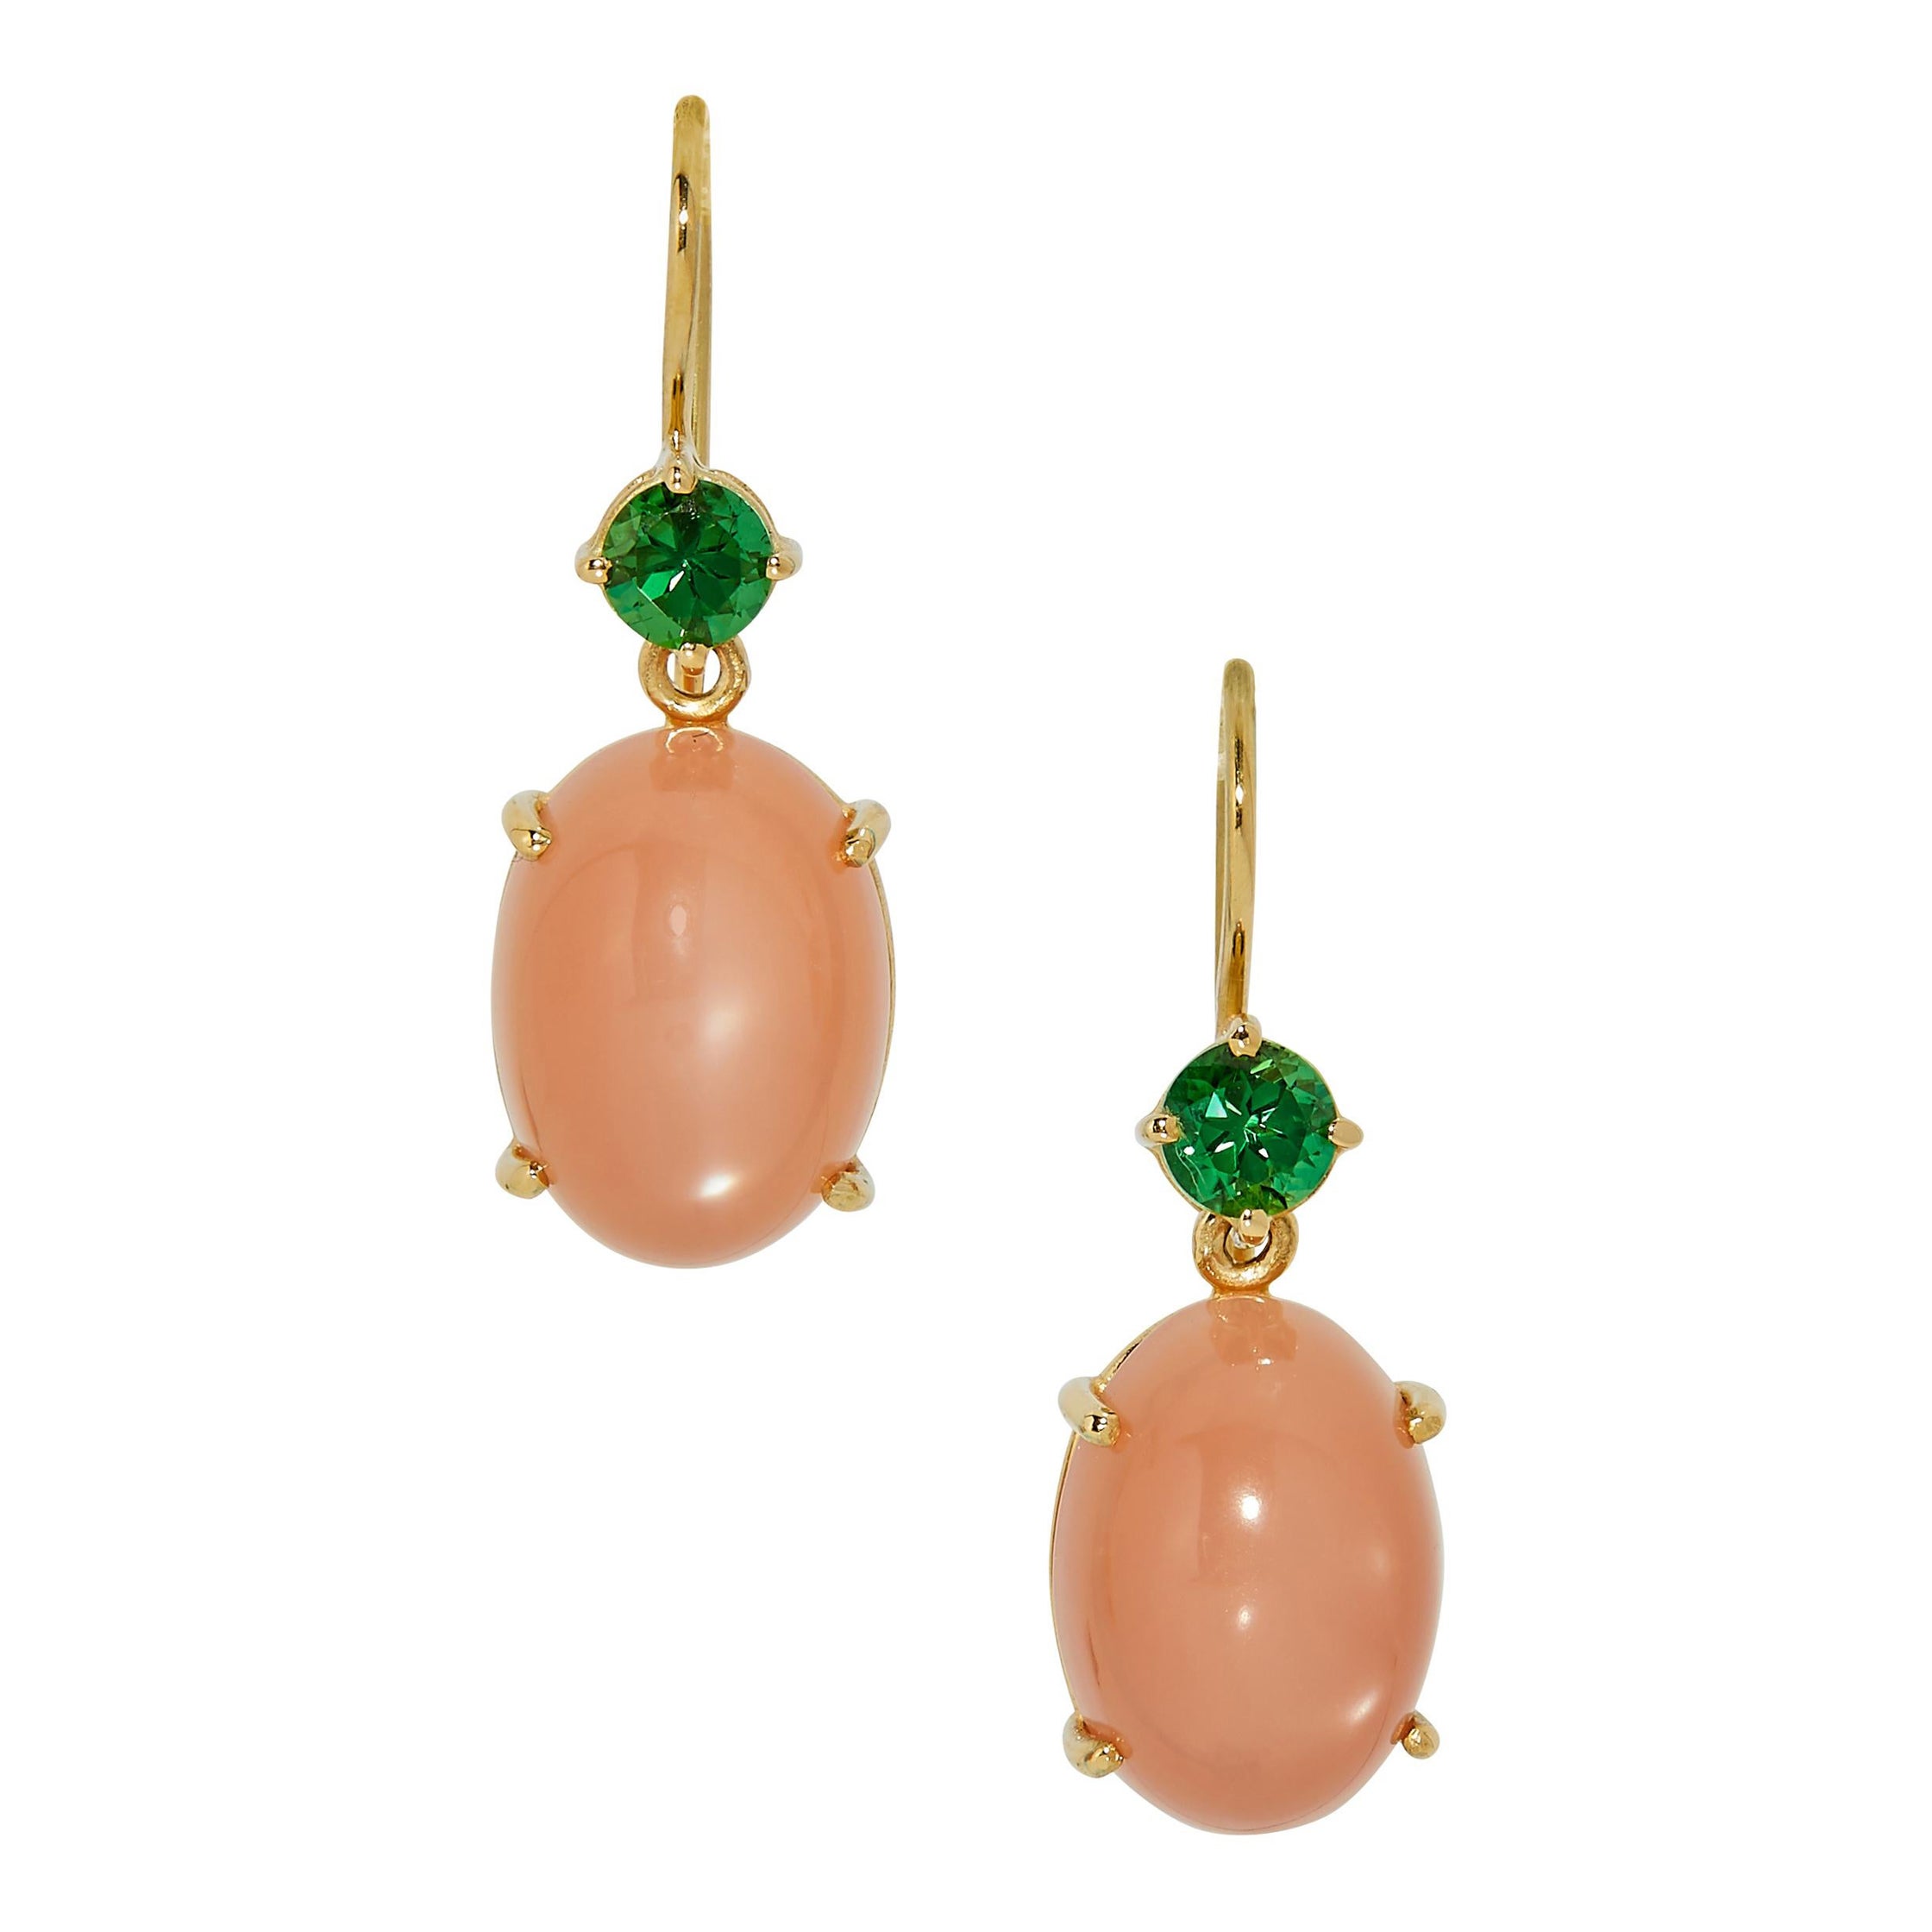 18K Yellow Gold Drop Dangle Earrings with 13.47 Carat Moonstones and Tourmalines